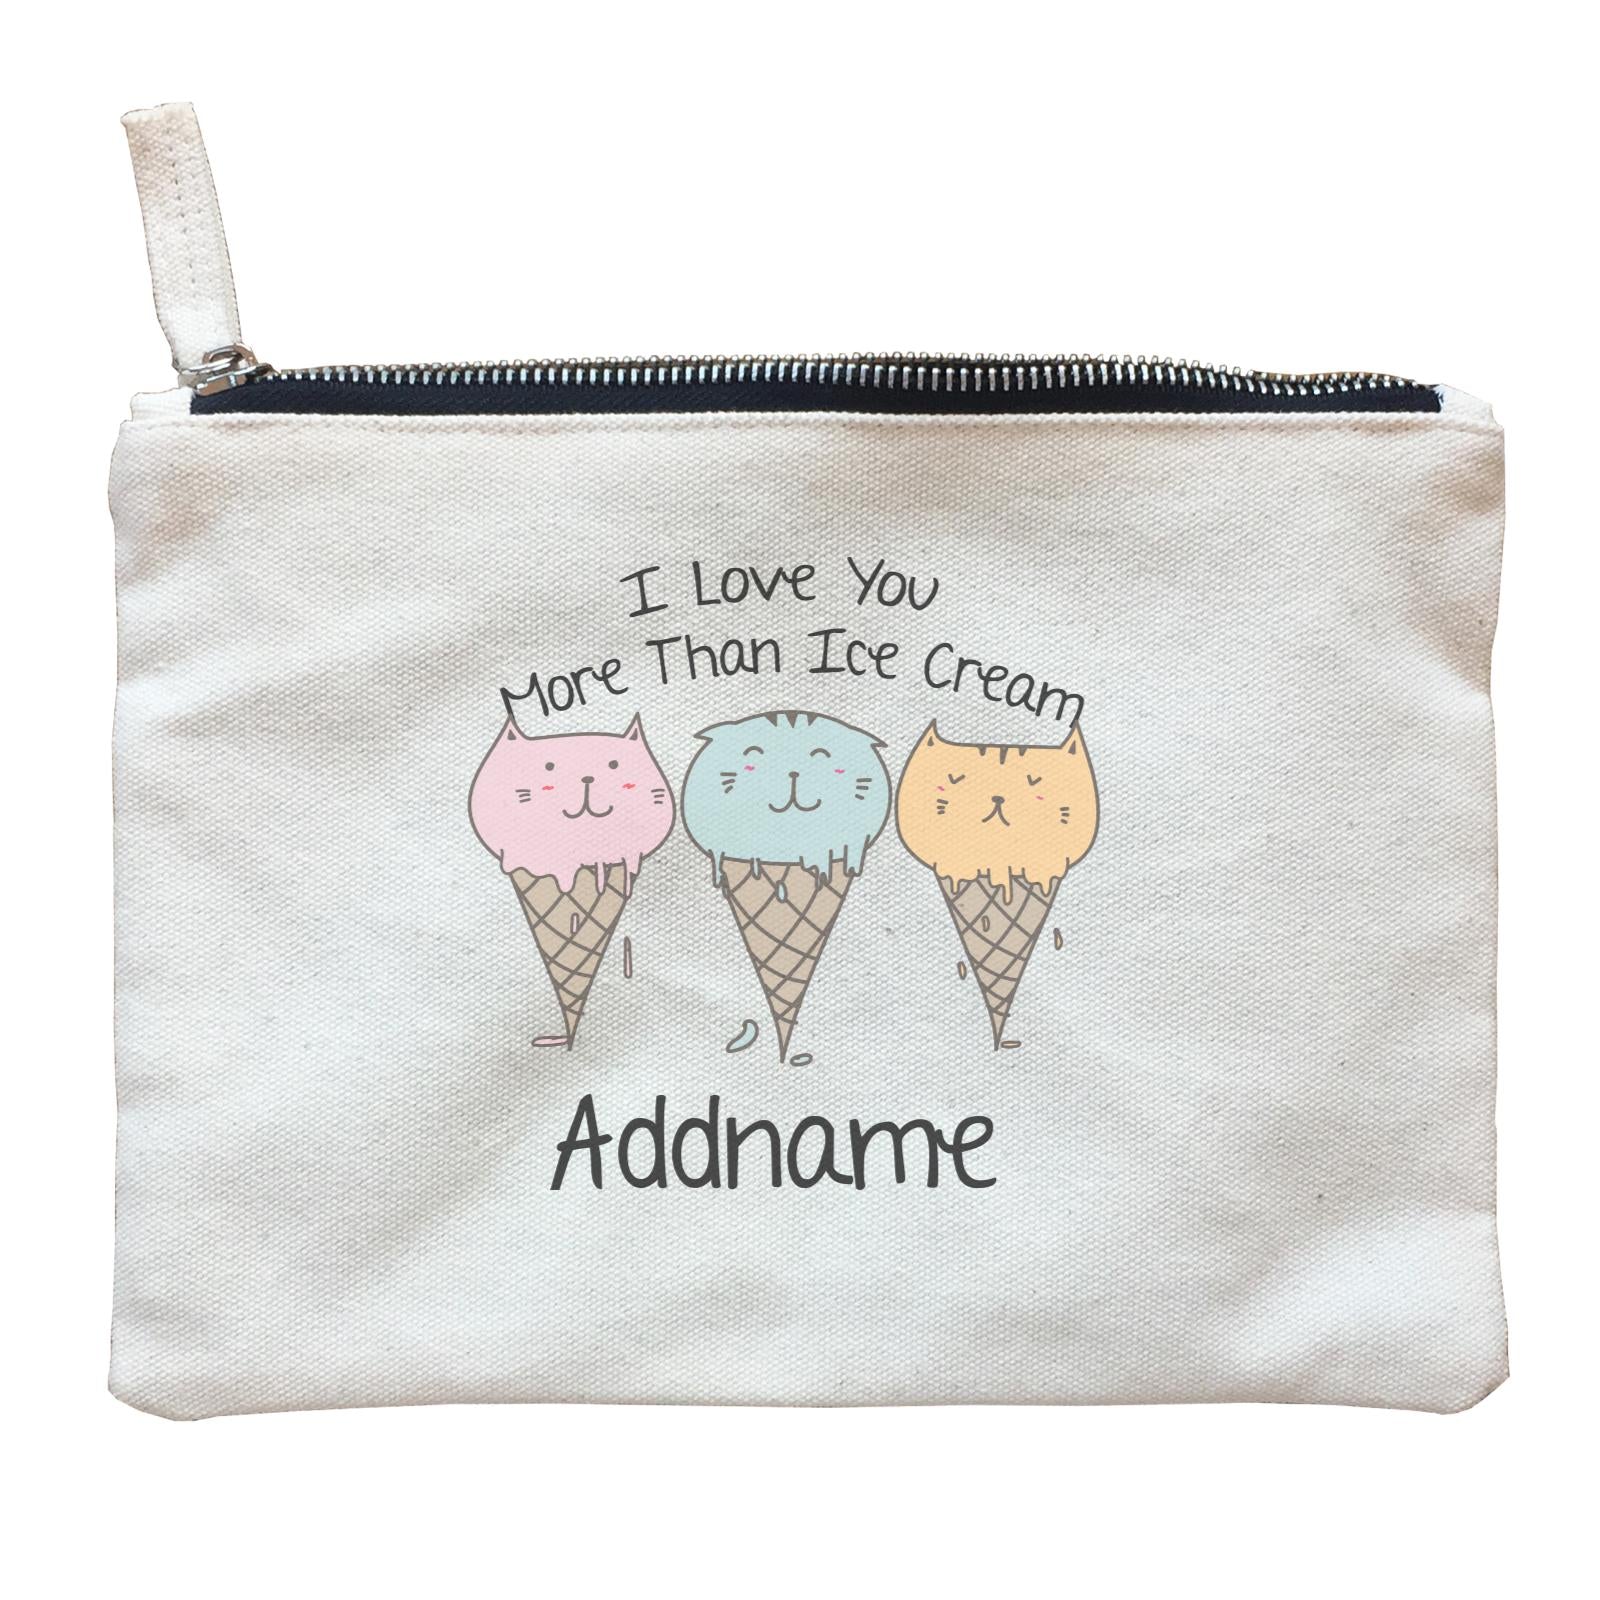 Cute Animals And Friends Series I Love You More Than Ice Cream Cats Addname Zipper Pouch